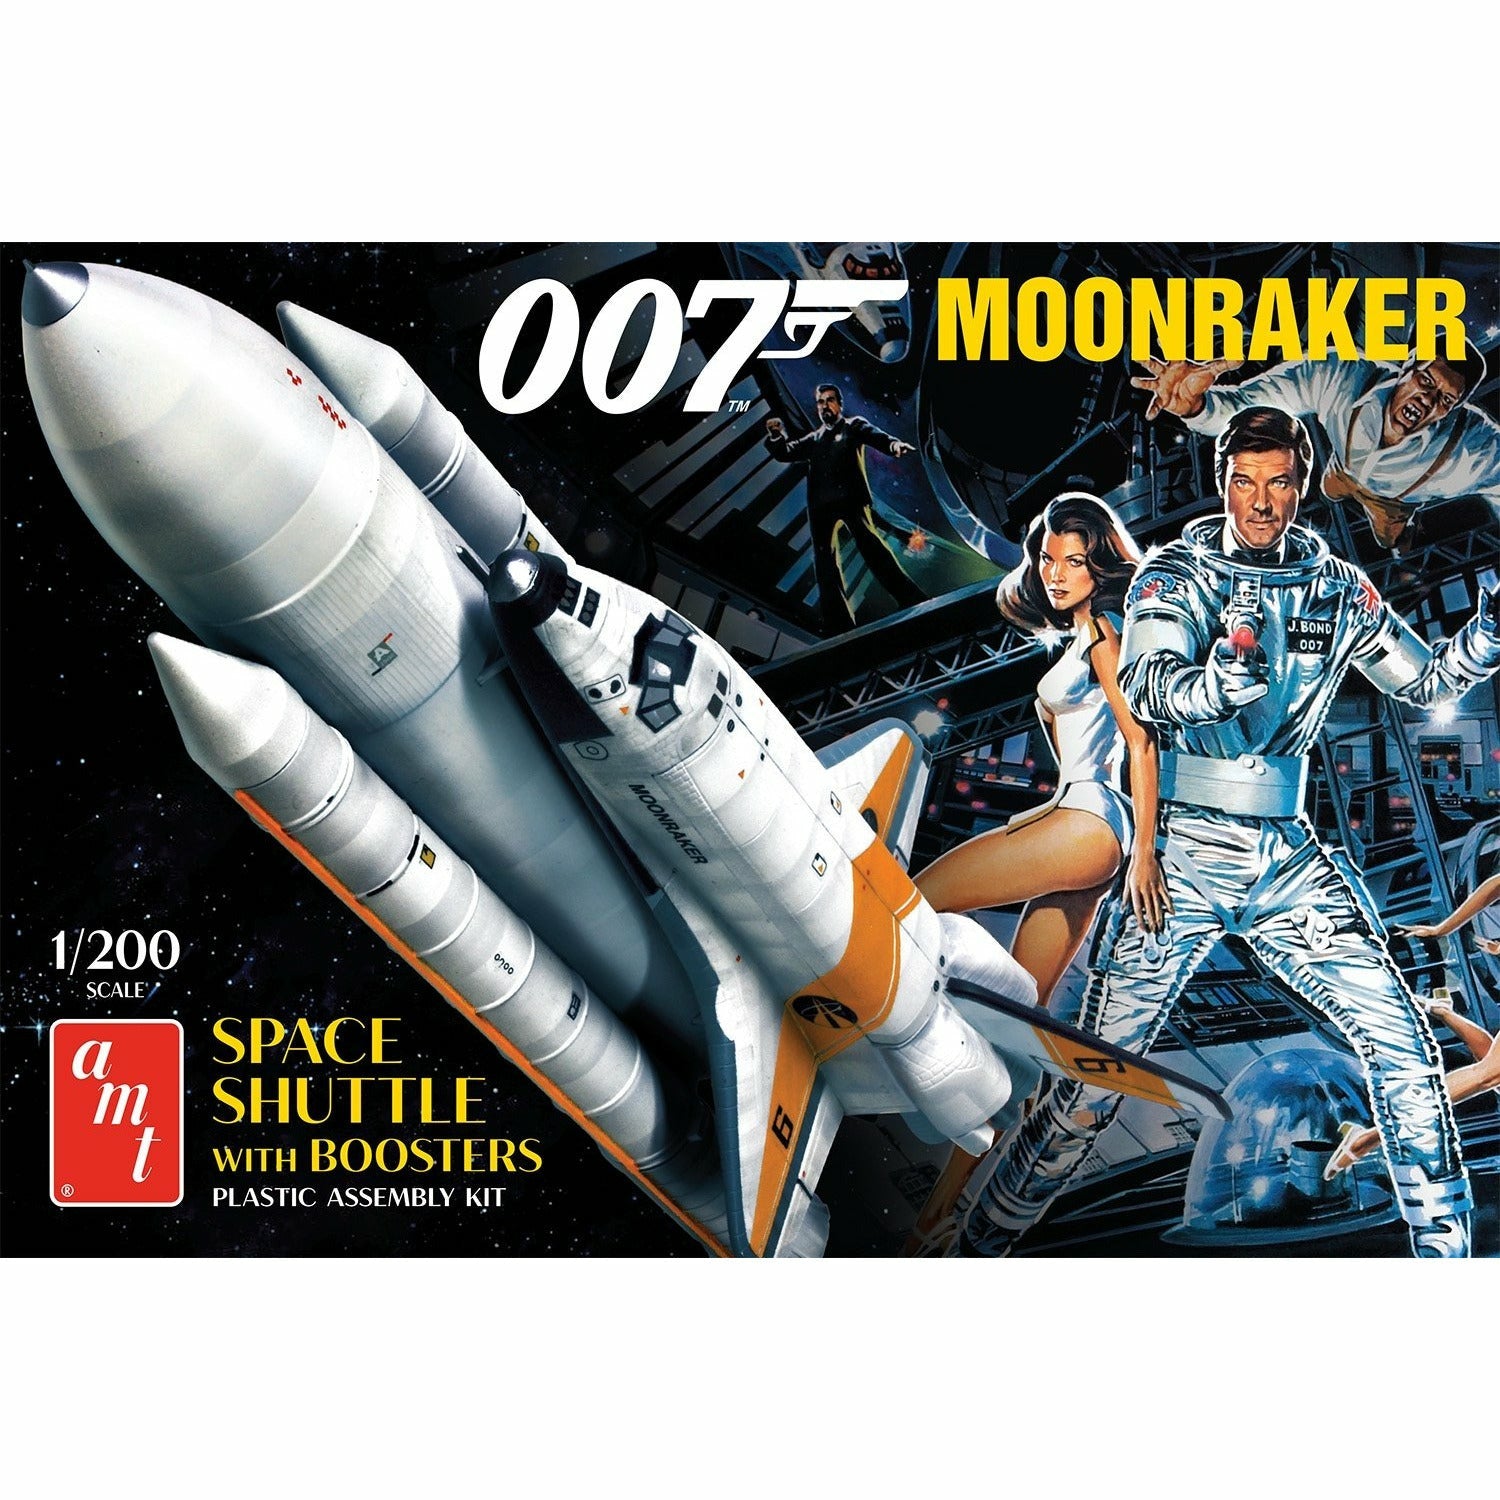 007 Moonraker Space Shuttle with Boosters 1/200th #1208 by AMT